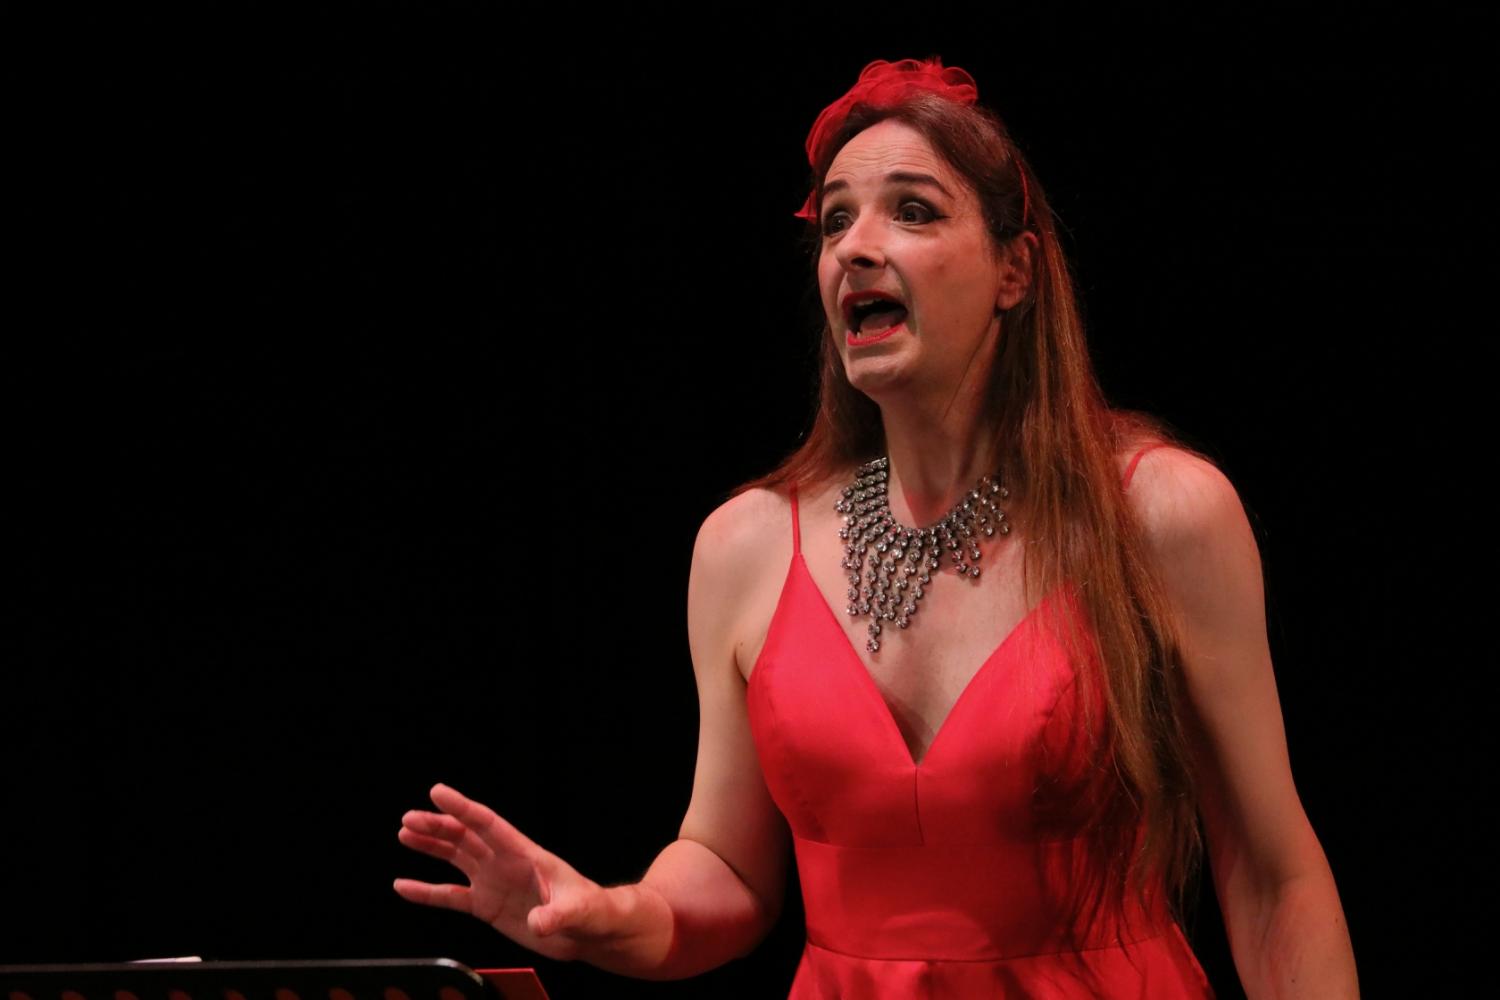 A woman with long brown hair stands in a red evening dress, behind a music stand. Her mouth is open; she is singing.